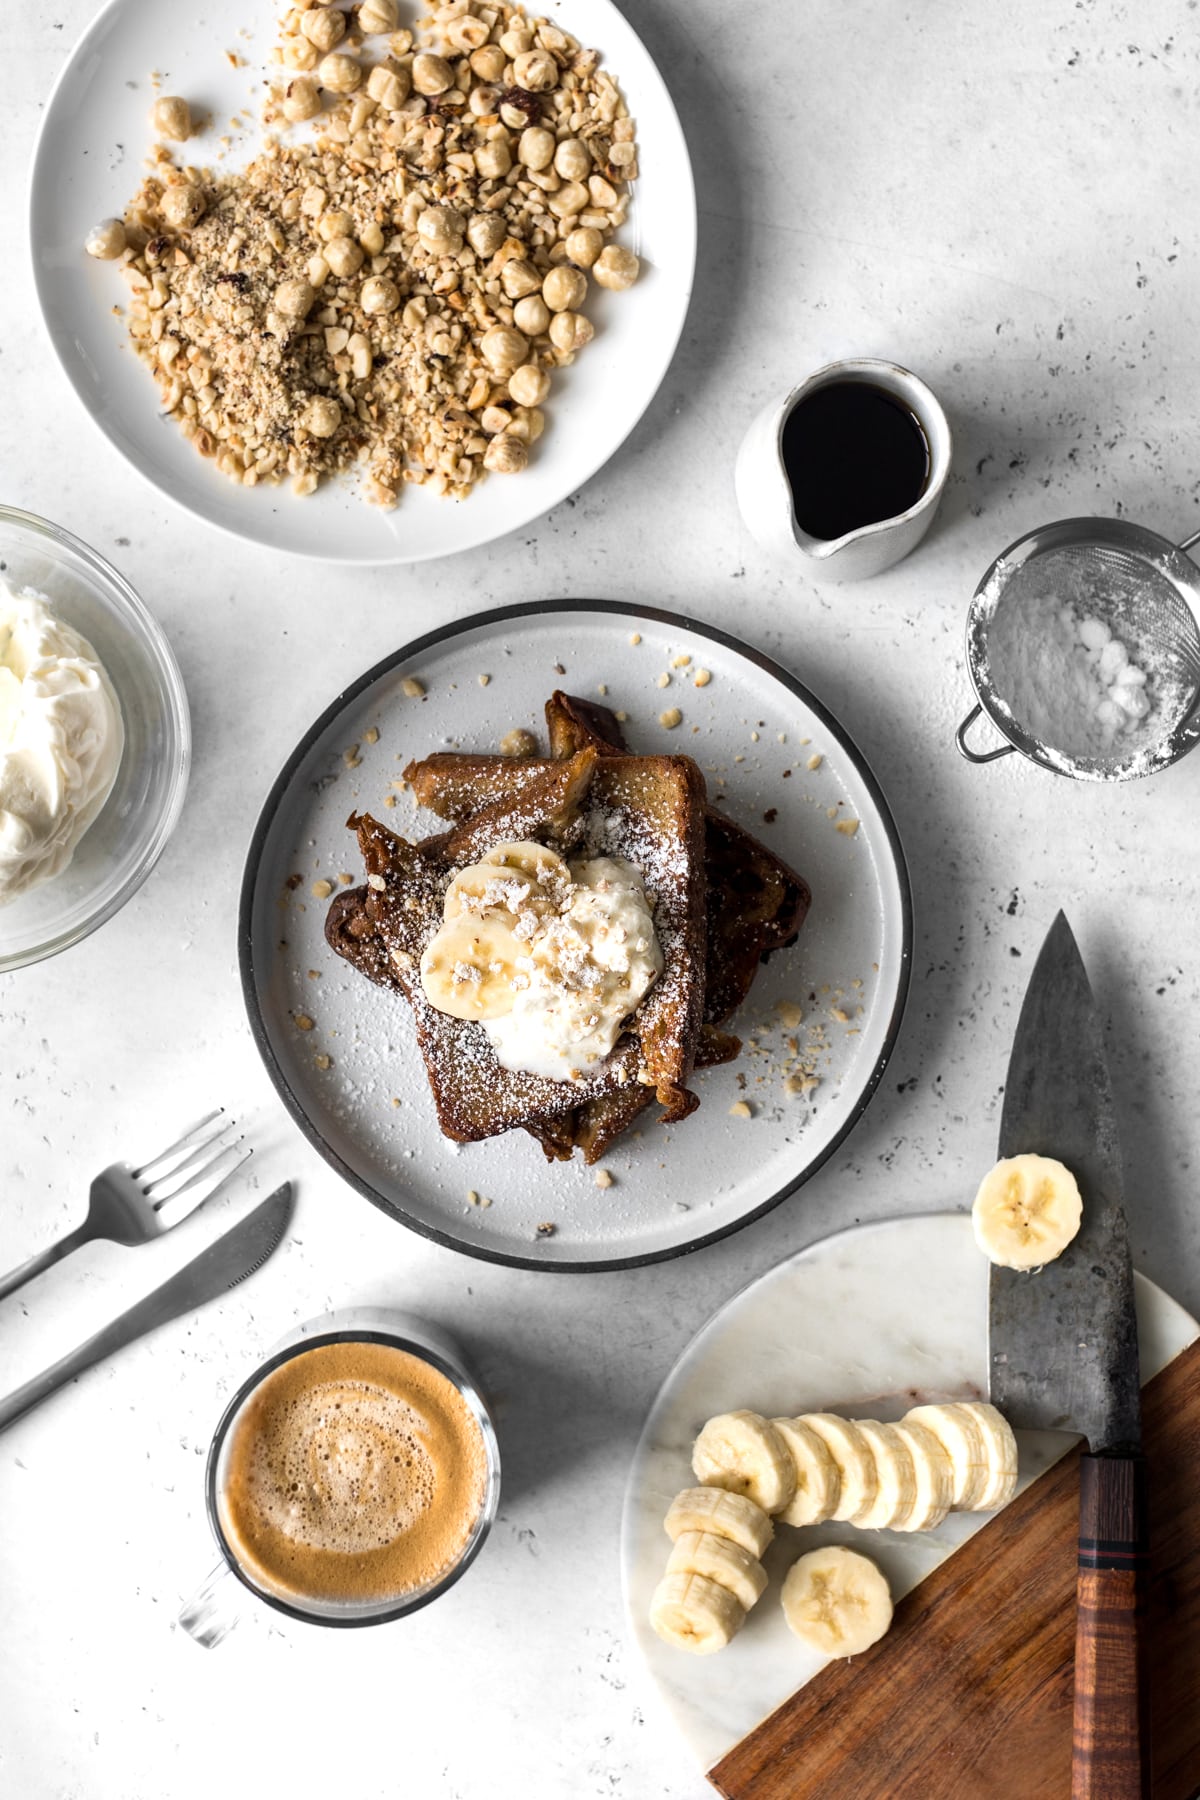 https://www.chefsouschef.com/wp-content/uploads/2020/05/Coffee-and-Cinnamon-French-Toast-Finished-1.jpg